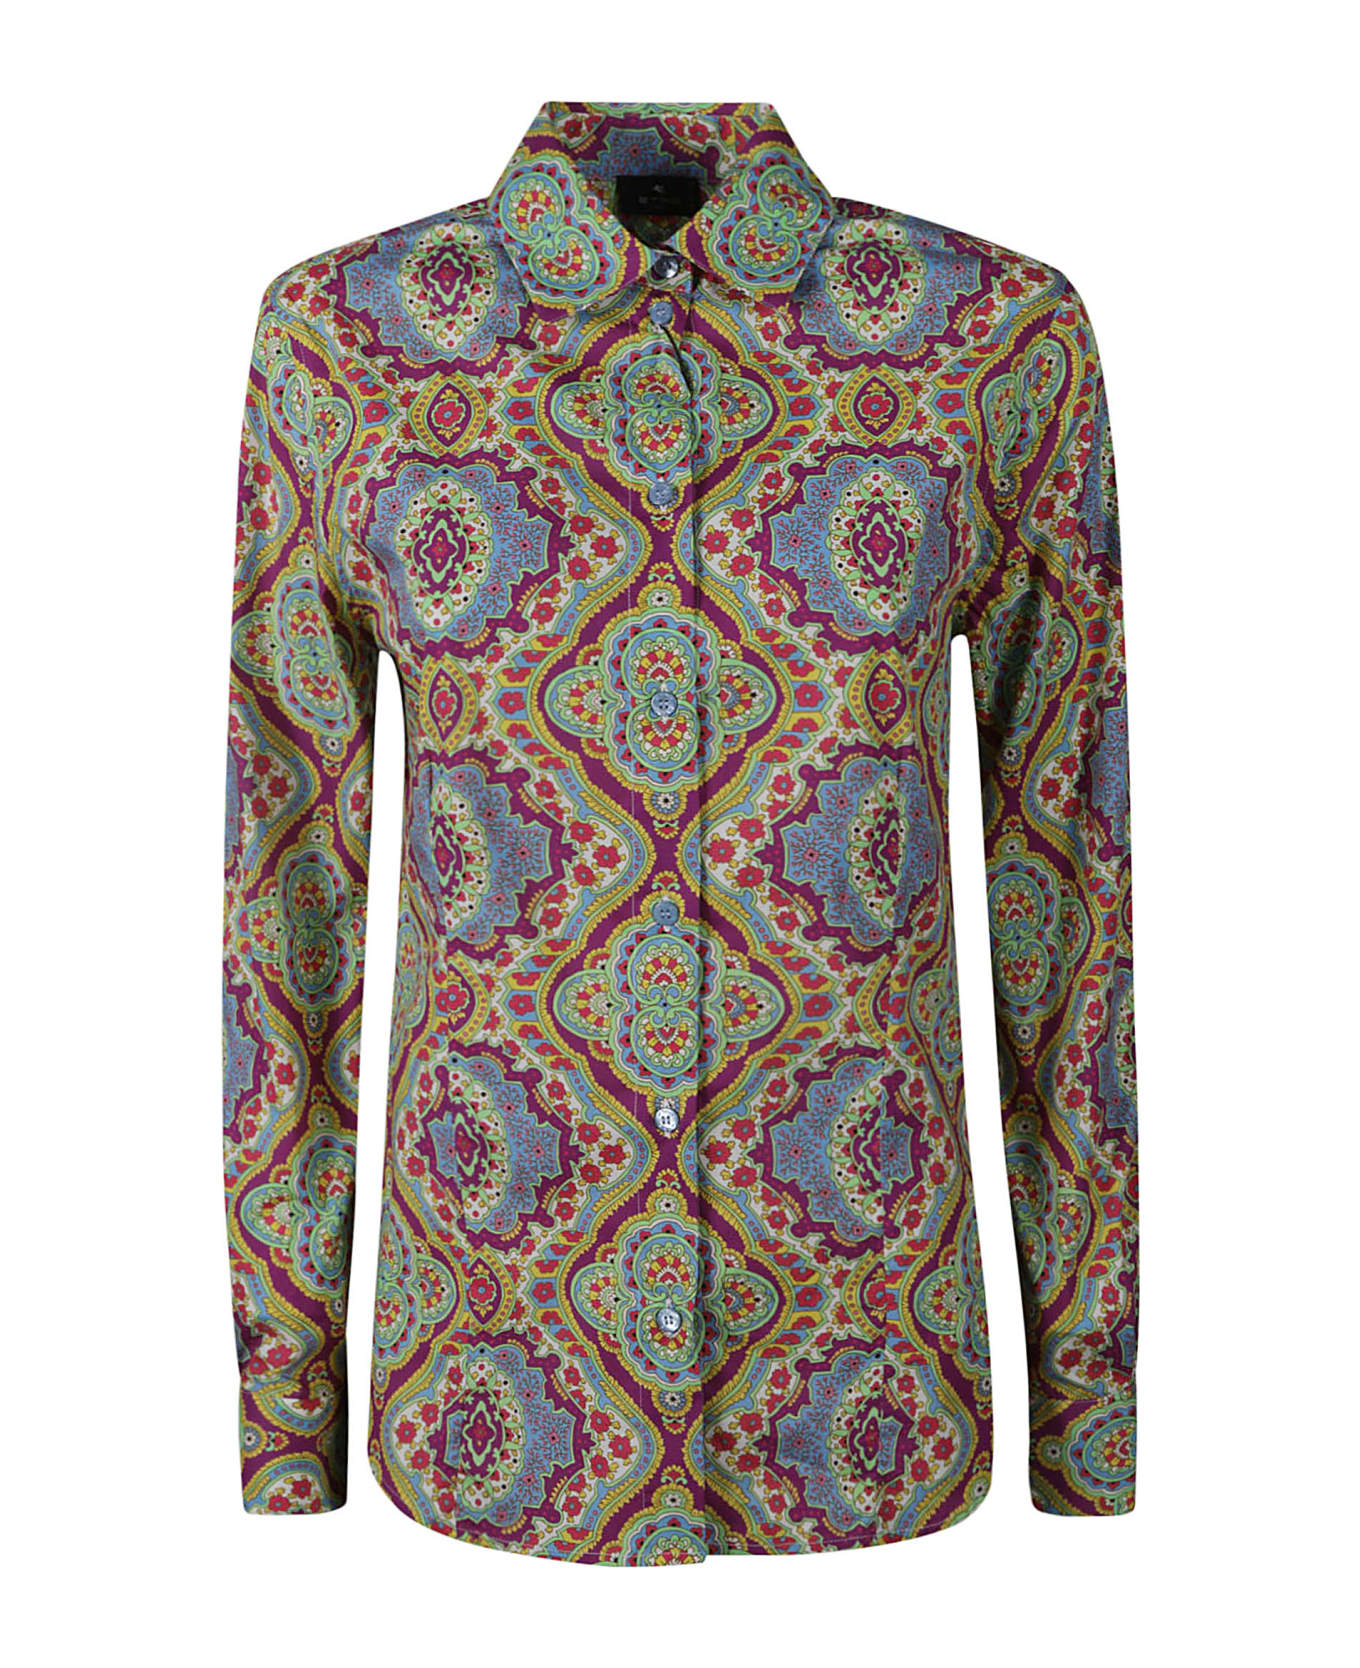 Etro Graphic Printed Buttoned Shirt - Multicolor シャツ